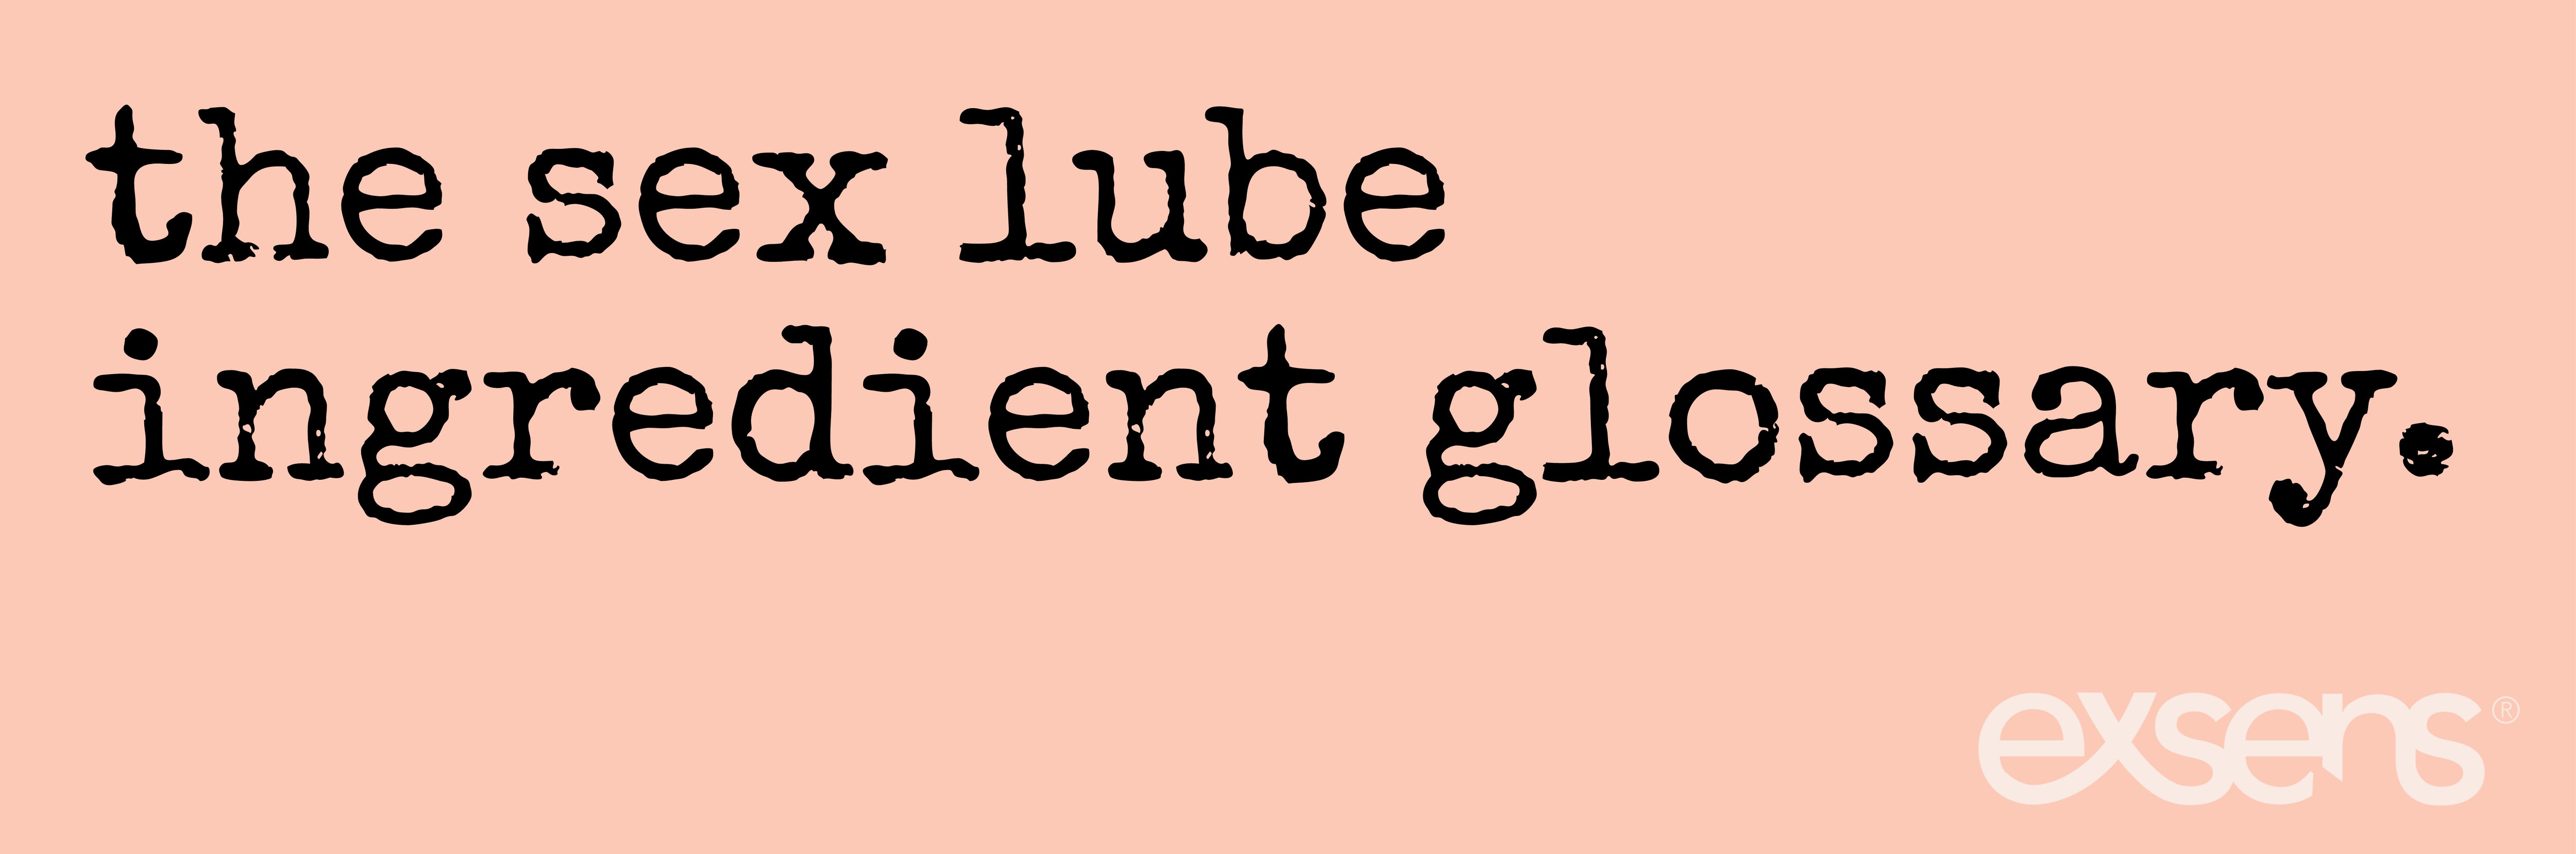 Lube Lessons 3 The Sex Lube Ingredient Glossary Exsens 5021